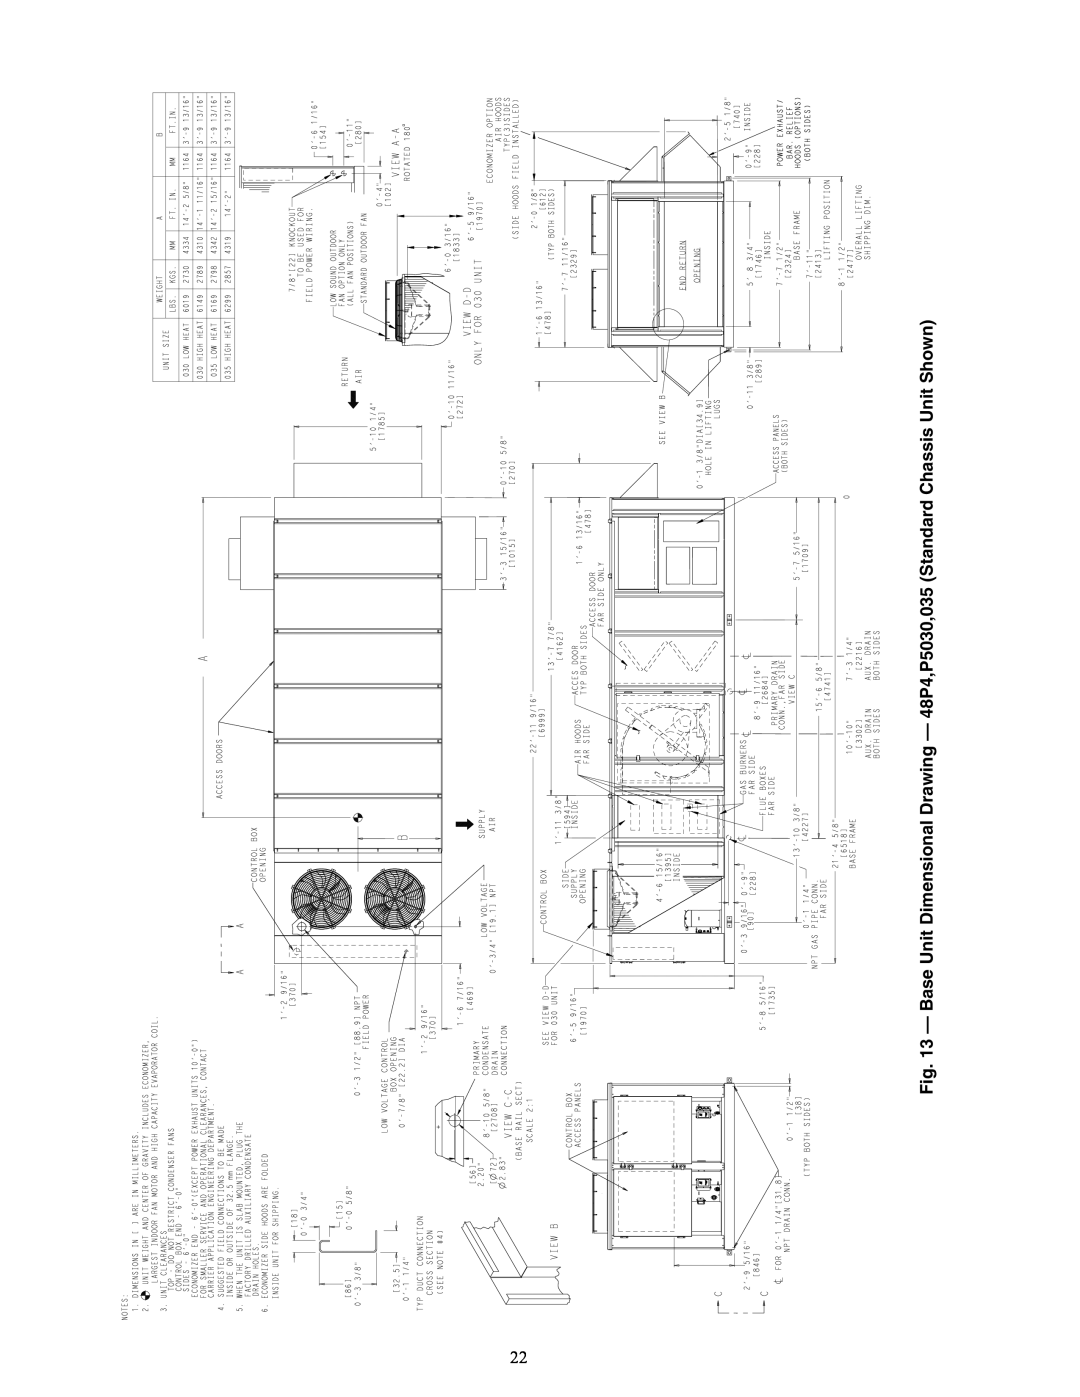 Carrier 48P2, P5030-100, P3, P4 installation instructions a48-8614 